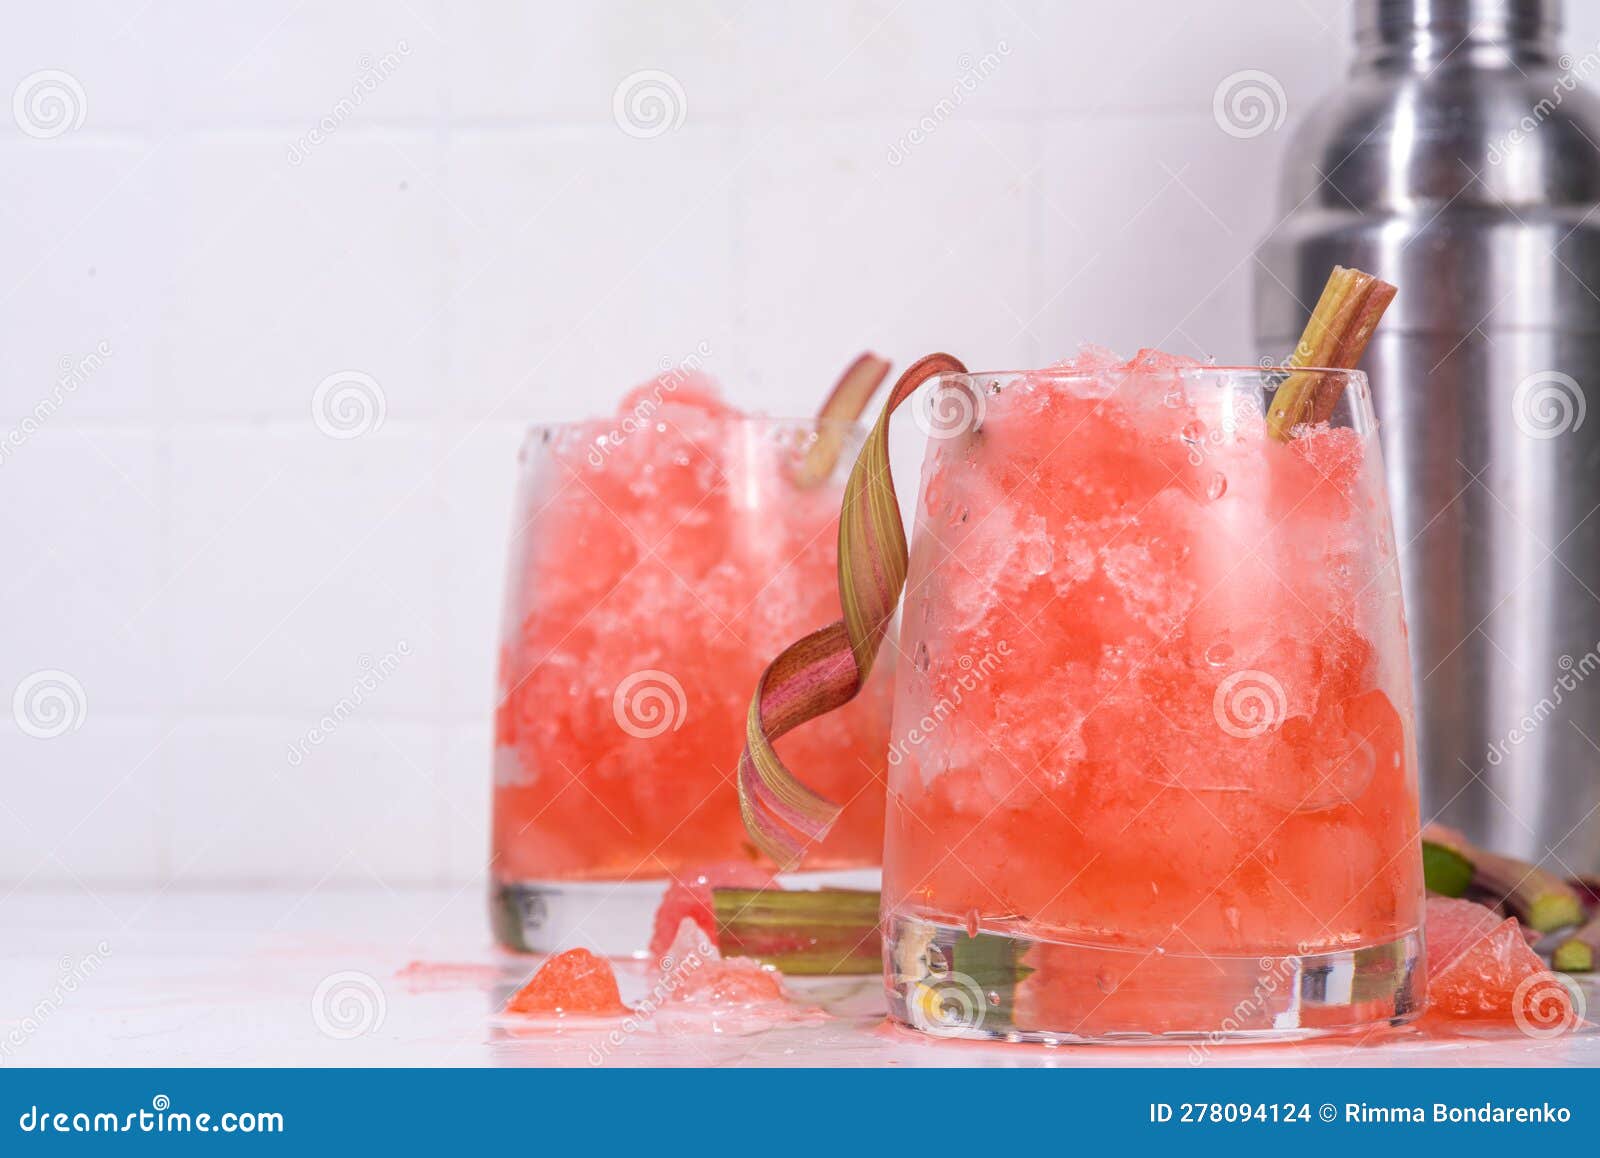 https://thumbs.dreamstime.com/z/refreshing-rhubarb-sour-fizz-cocktail-summer-frozen-sweet-slushy-sirup-rum-champagne-cold-healthy-278094124.jpg